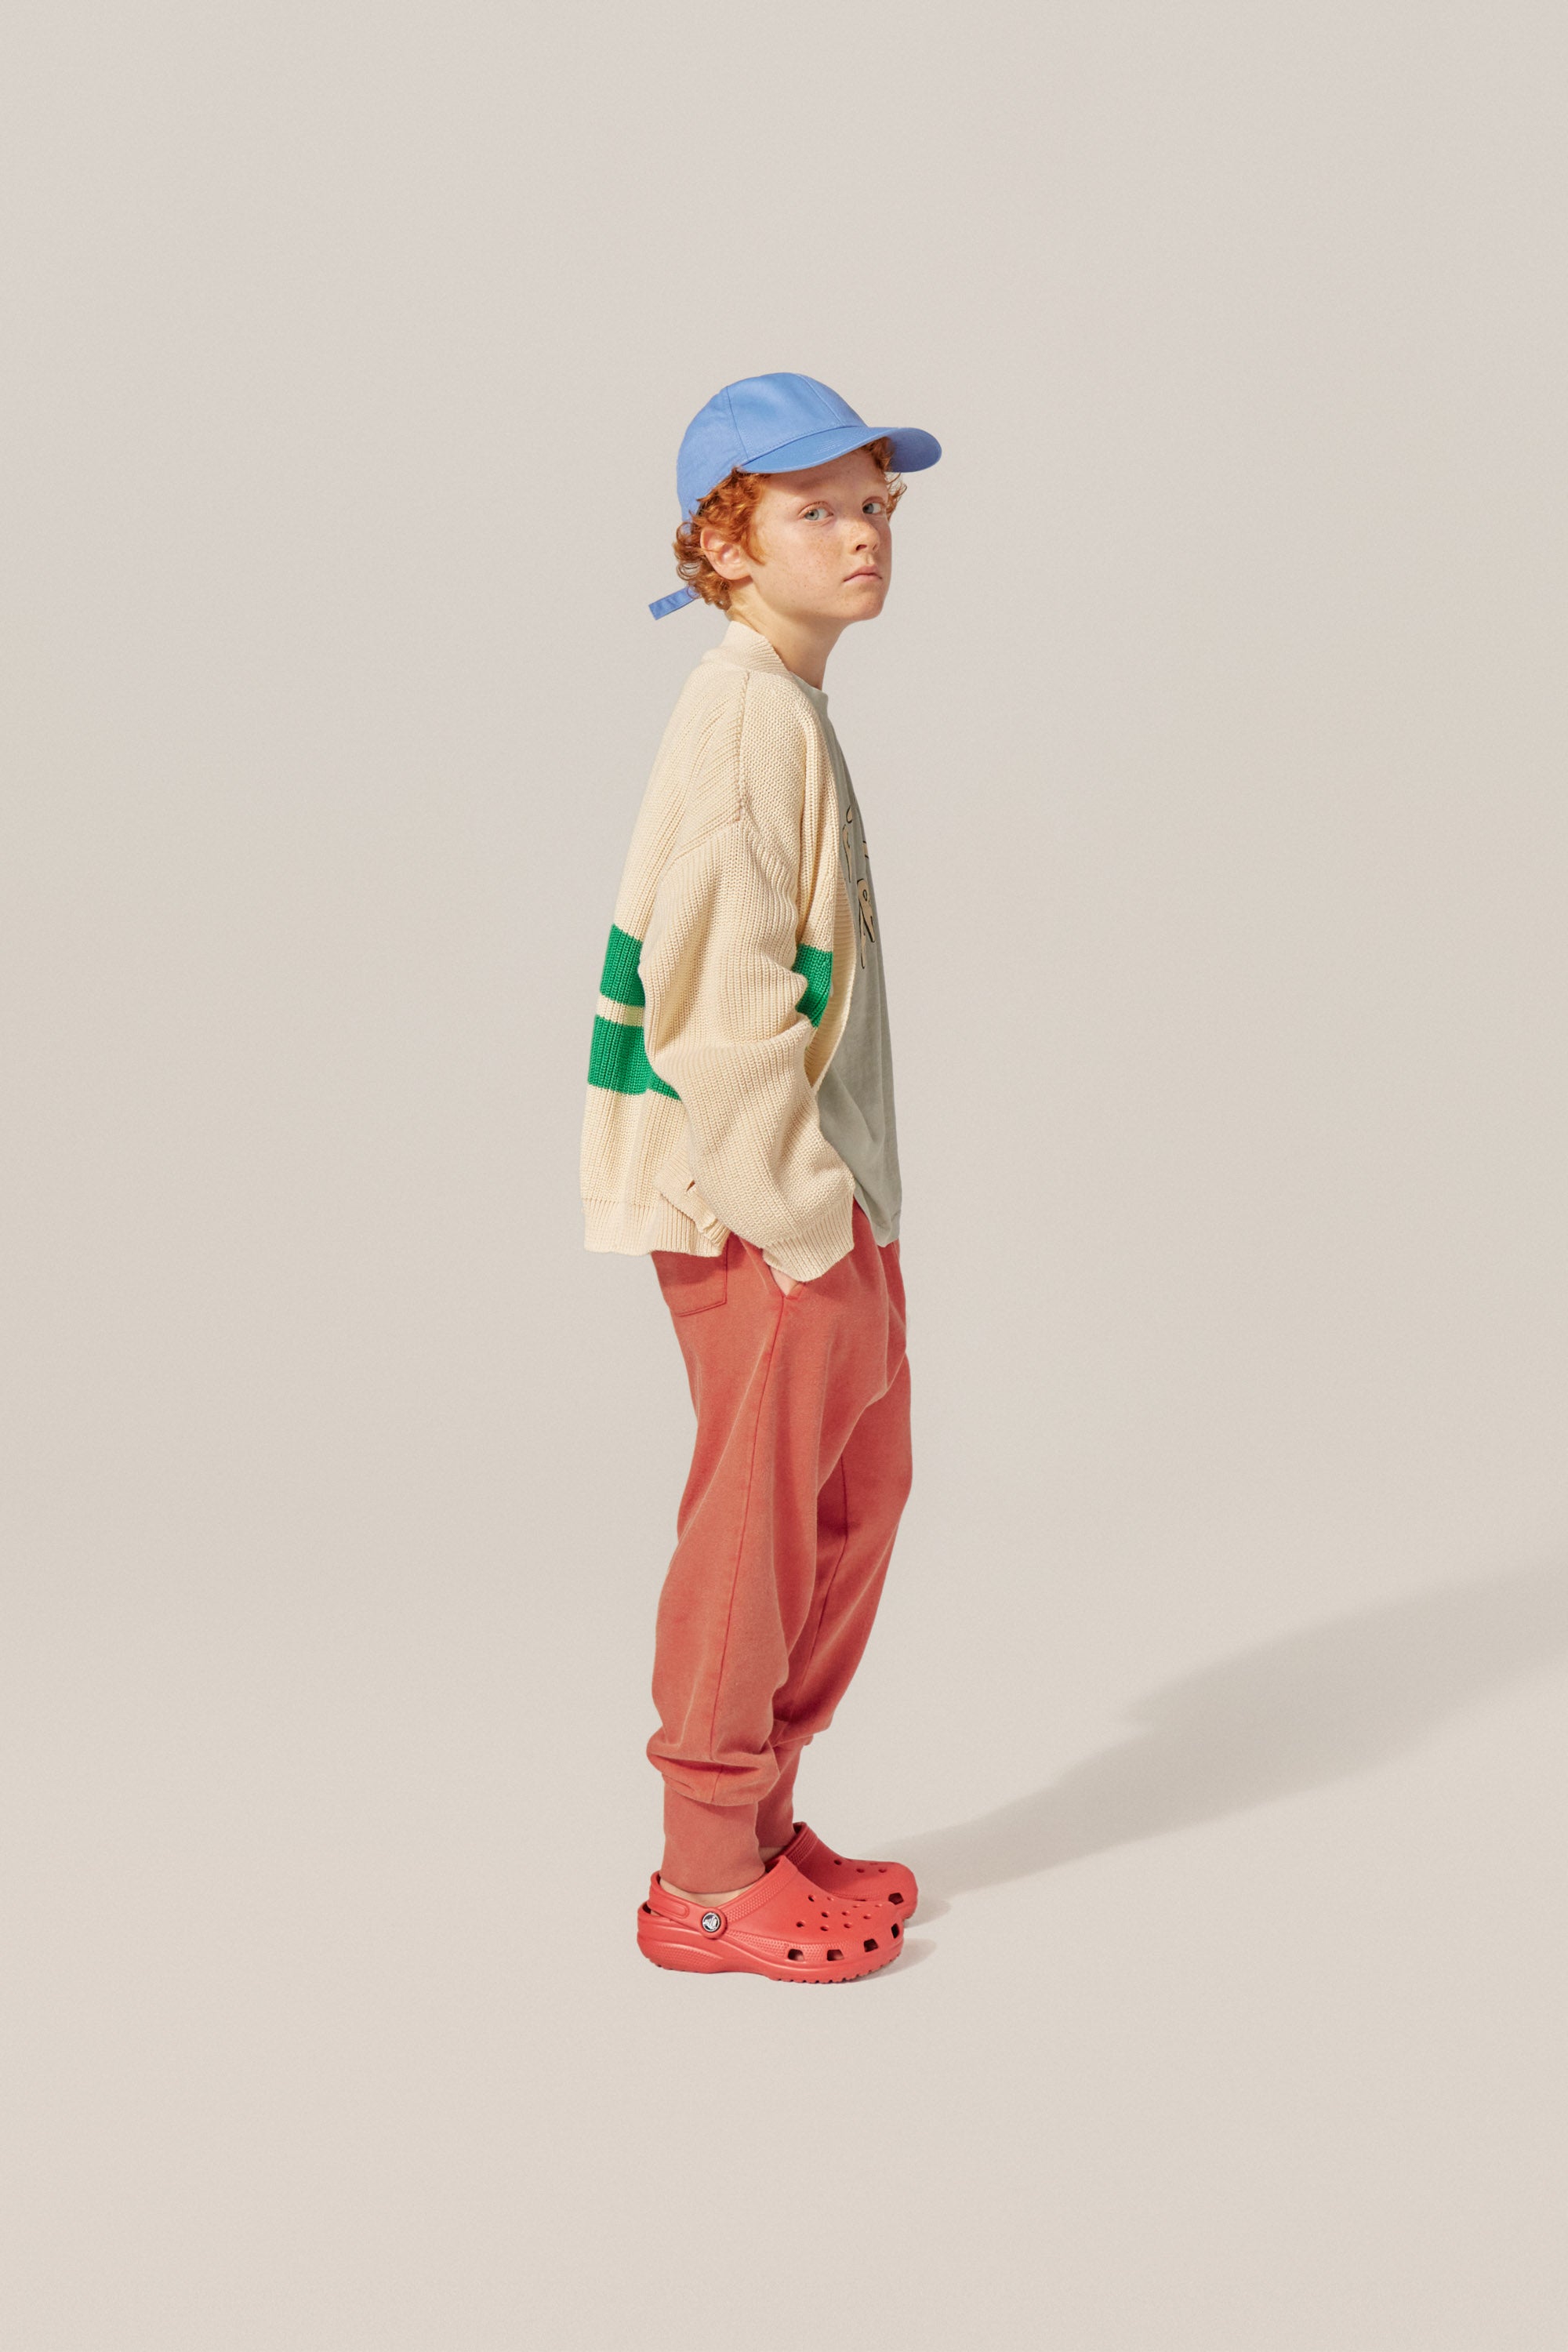 The Campamento - Red washed kids jogging trousers